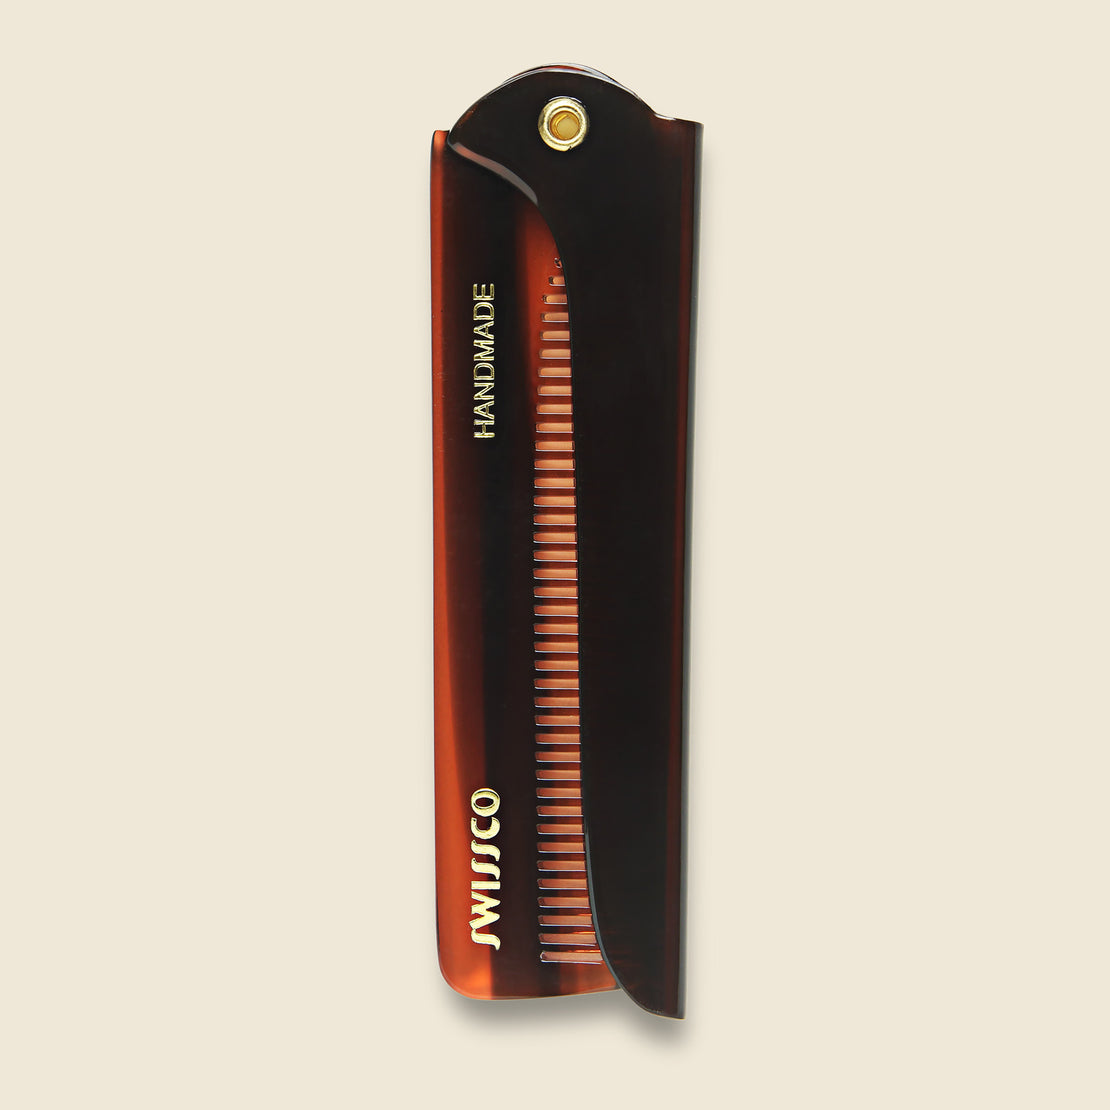 Tortoise Folding Comb - Grooming - STAG Provisions - Home - Chemist - Hair Care